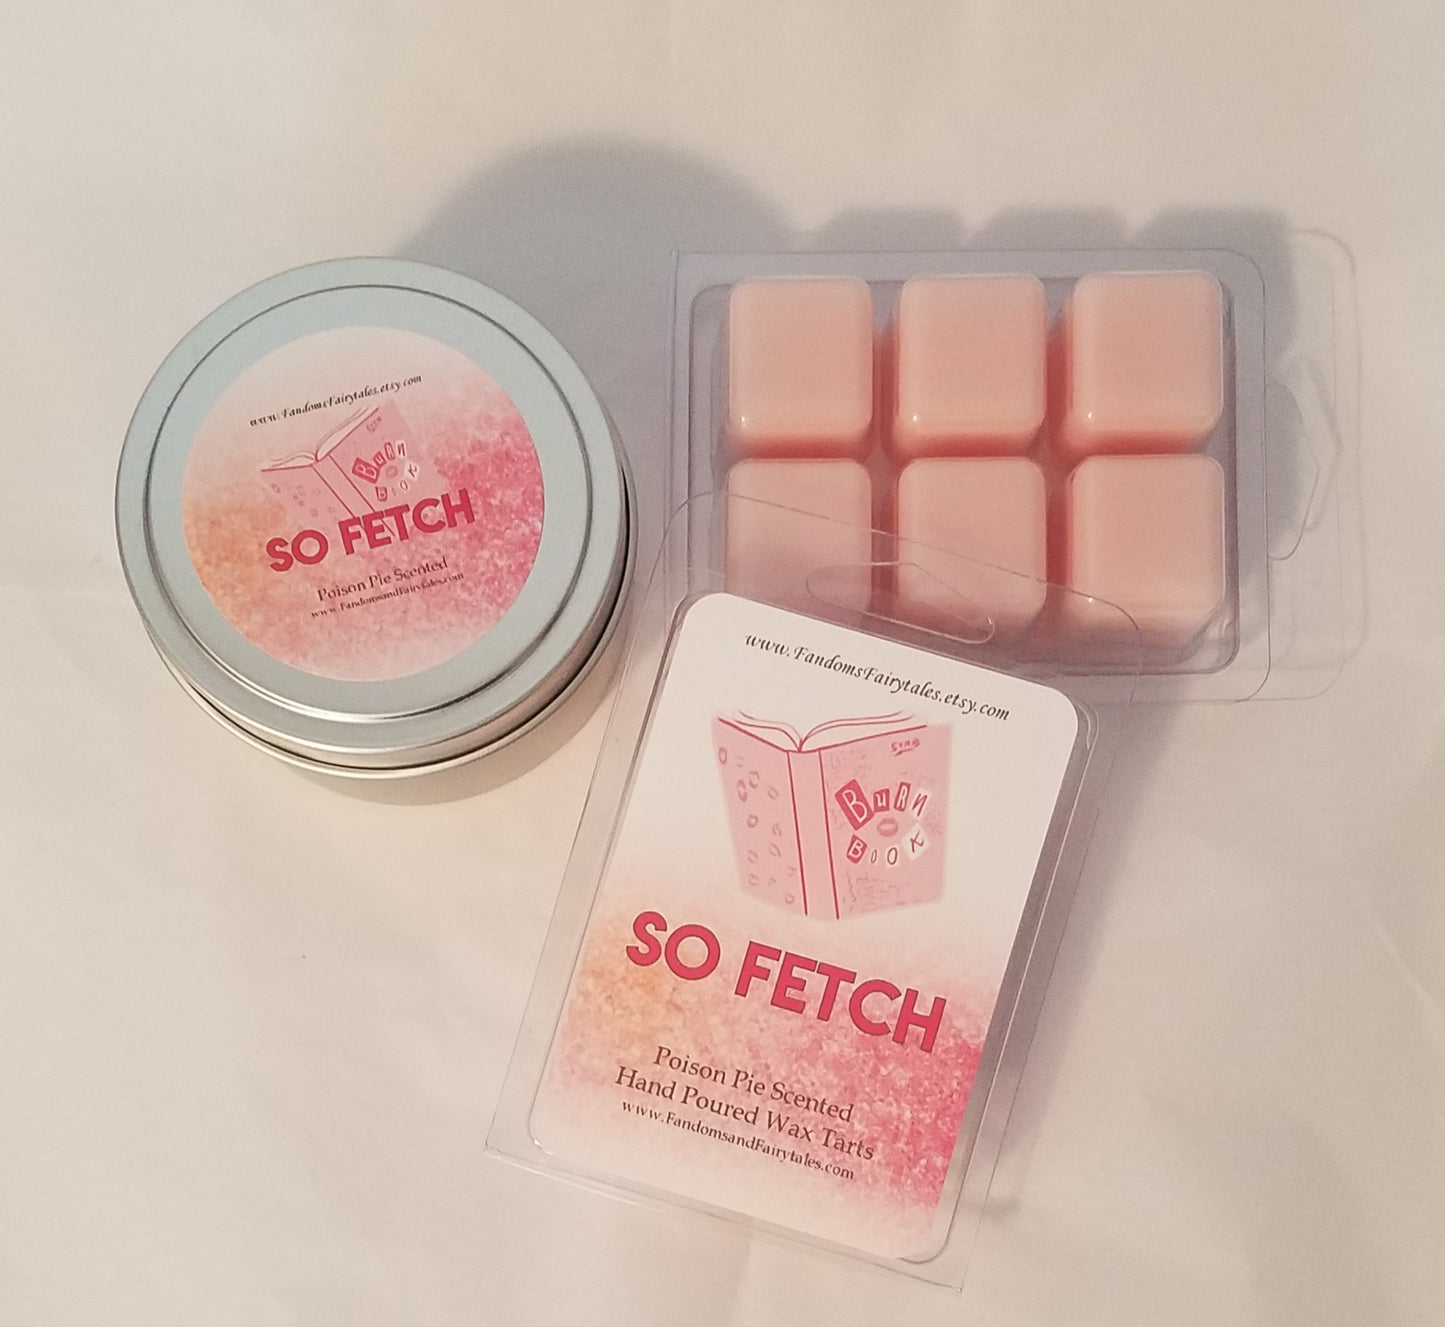 So Fetch Wax Melts and Candles - Poison Pie Scented - Mean Girls Inspired